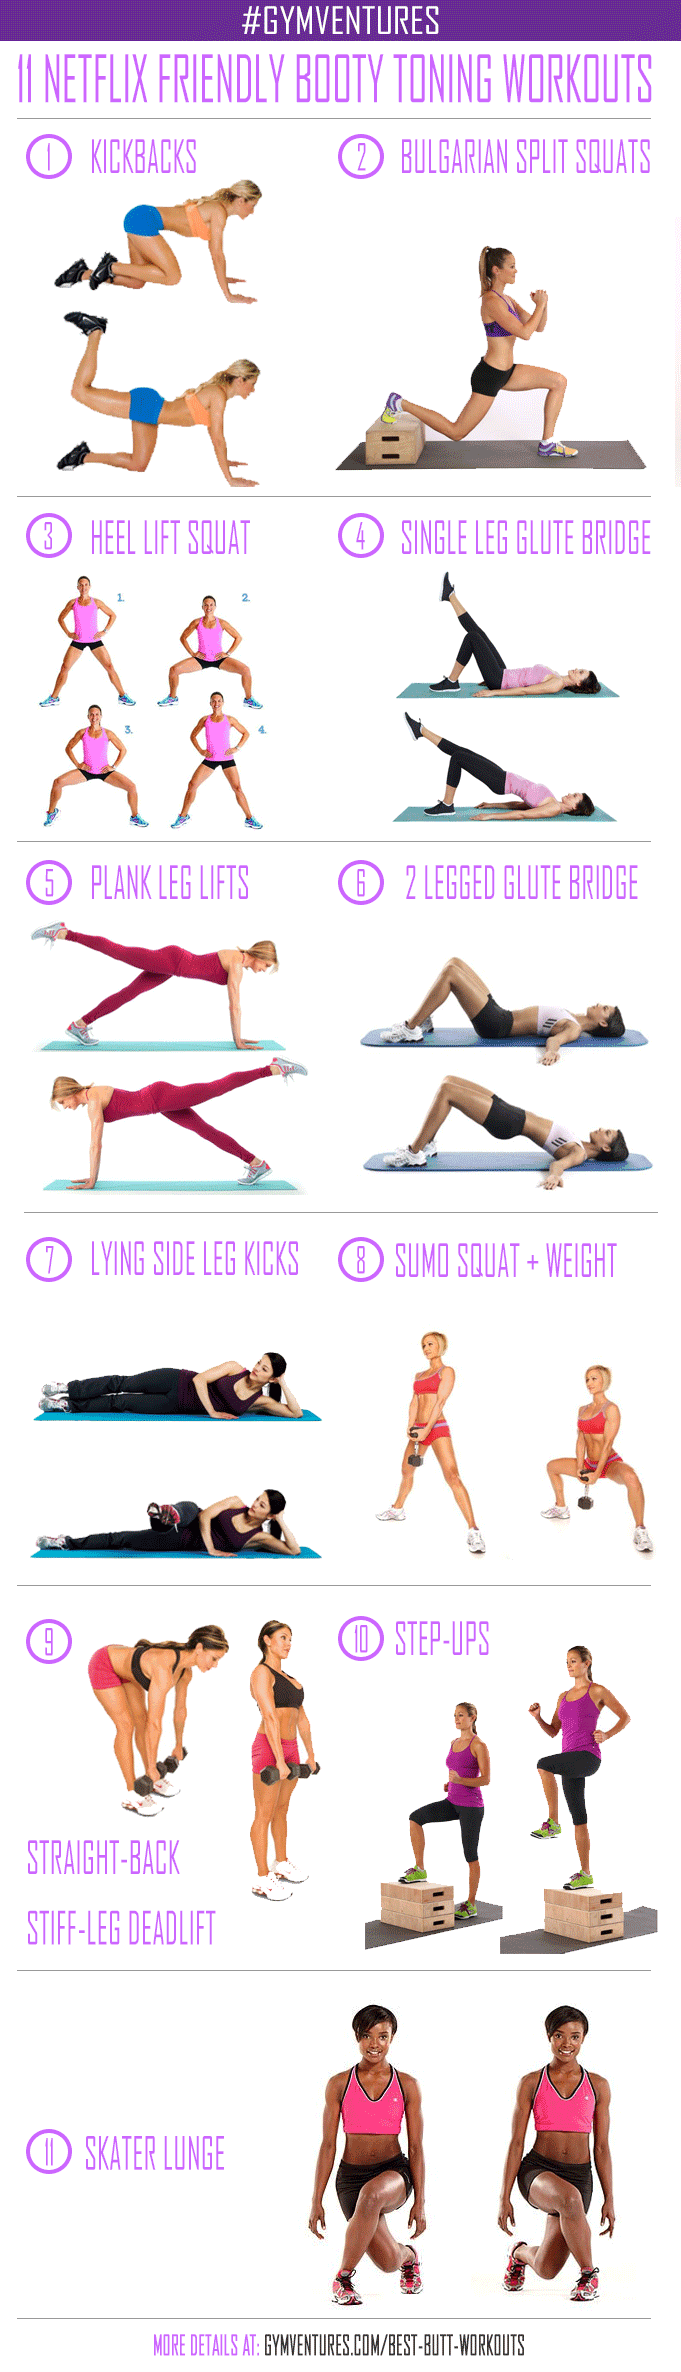 Booty-Toning-Workouts---Best-Butt-Workouts-&-Exercises